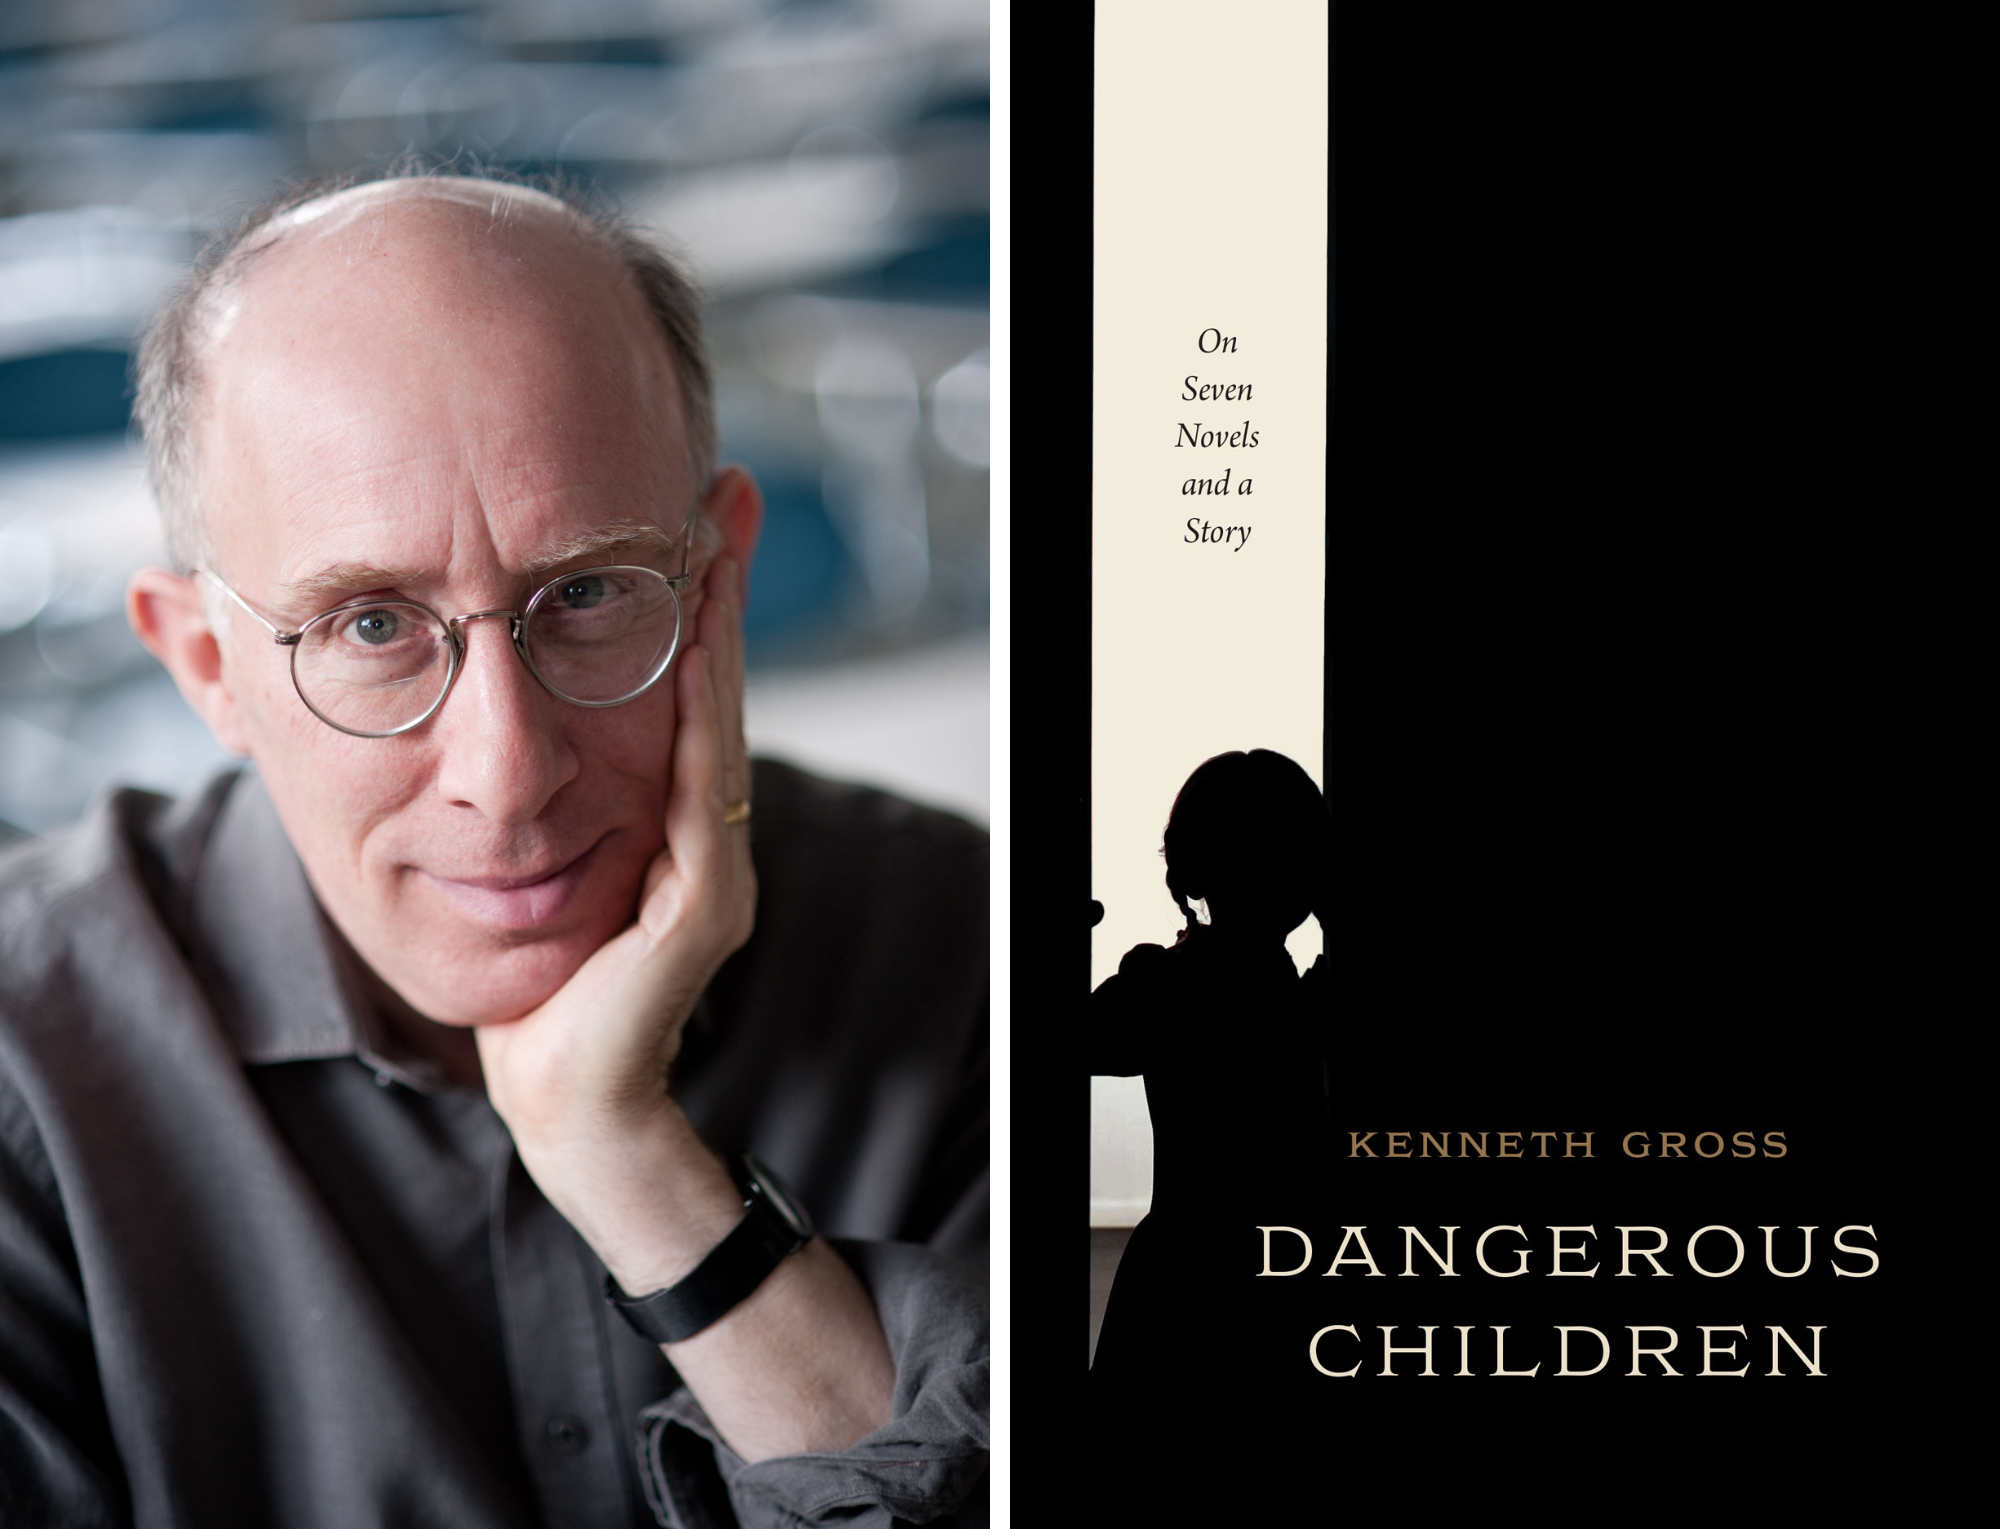 Diptych of Kenneth Gross's headshot alongside the book cover art for Dangerous Children: On Seven Novels and a Story.